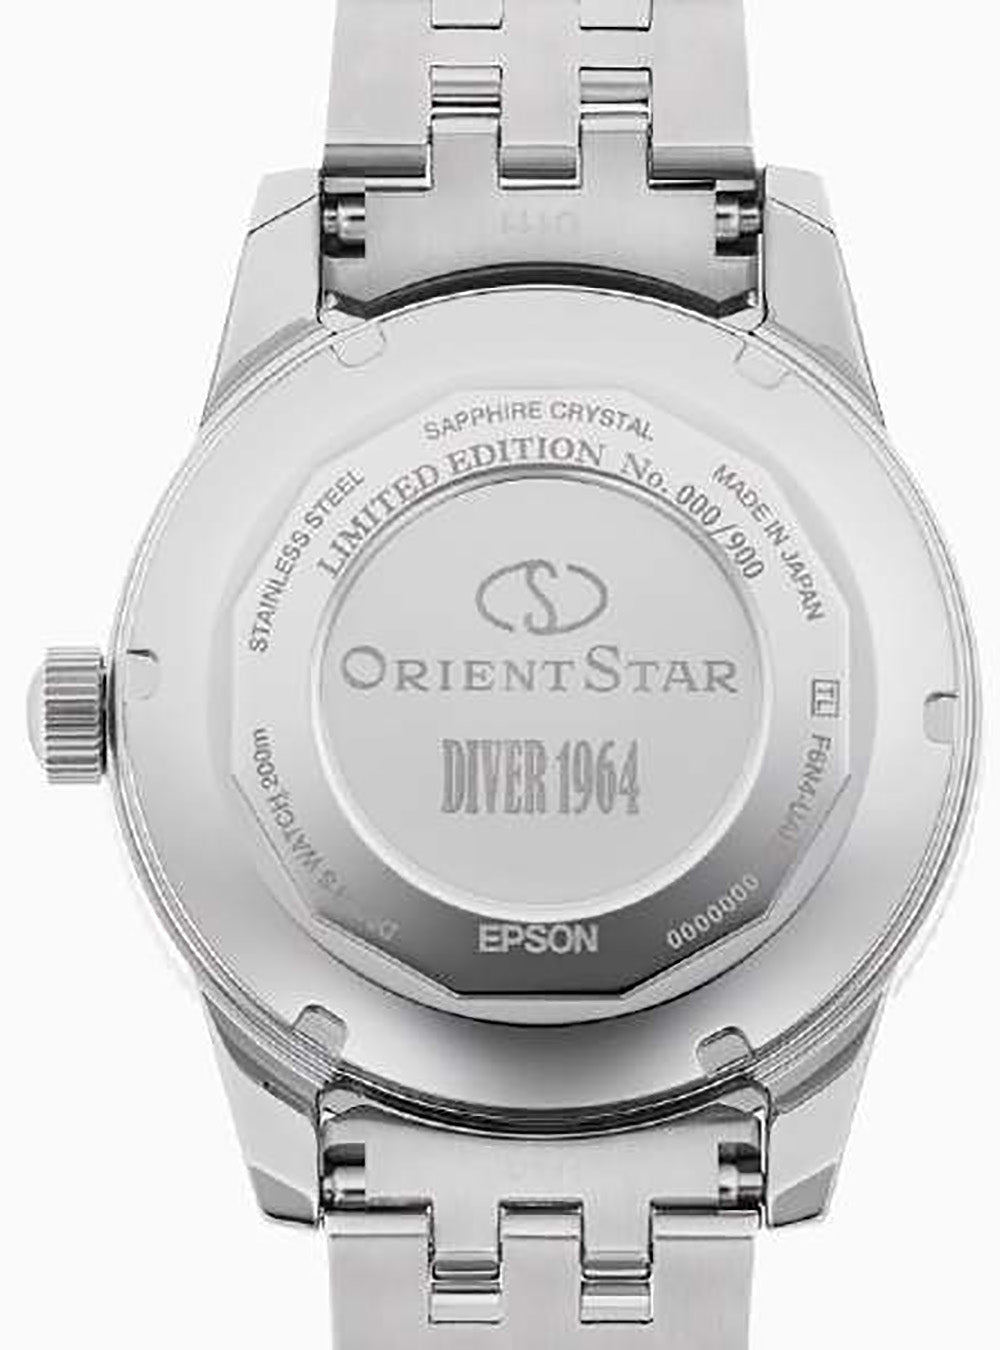 ORIENT STAR MECHANICAL SPORTS DIVER 1964 1ST EDITION RK-AU0502S MADE IN  JAPAN JDM